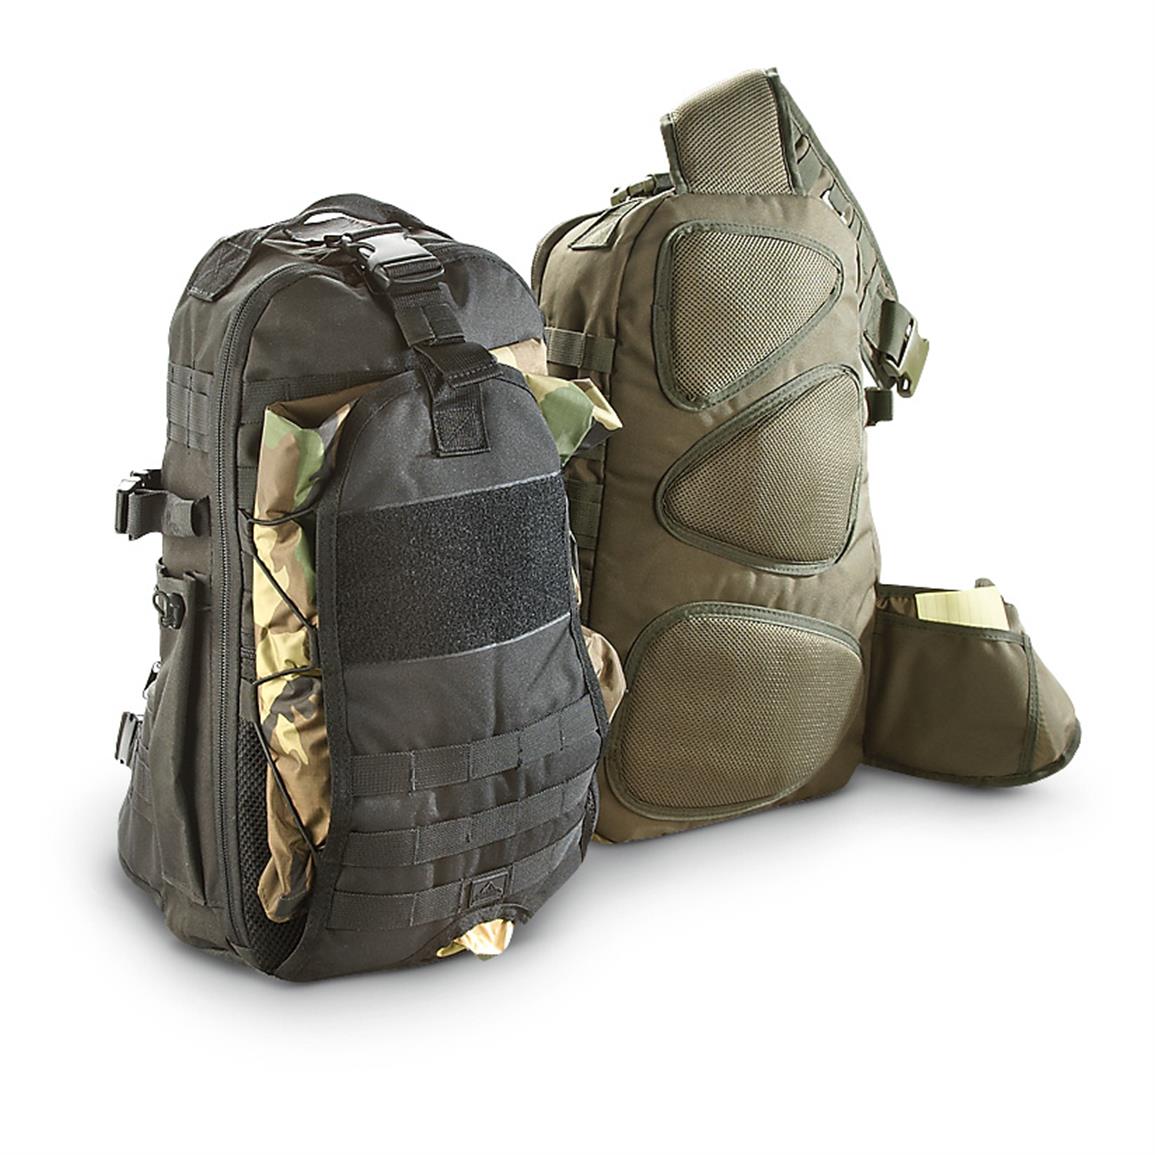 Red Rock Outdoor Gear™ Tactical Sling Bag - 596577, Military Messenger Bags at Sportsman&#39;s Guide